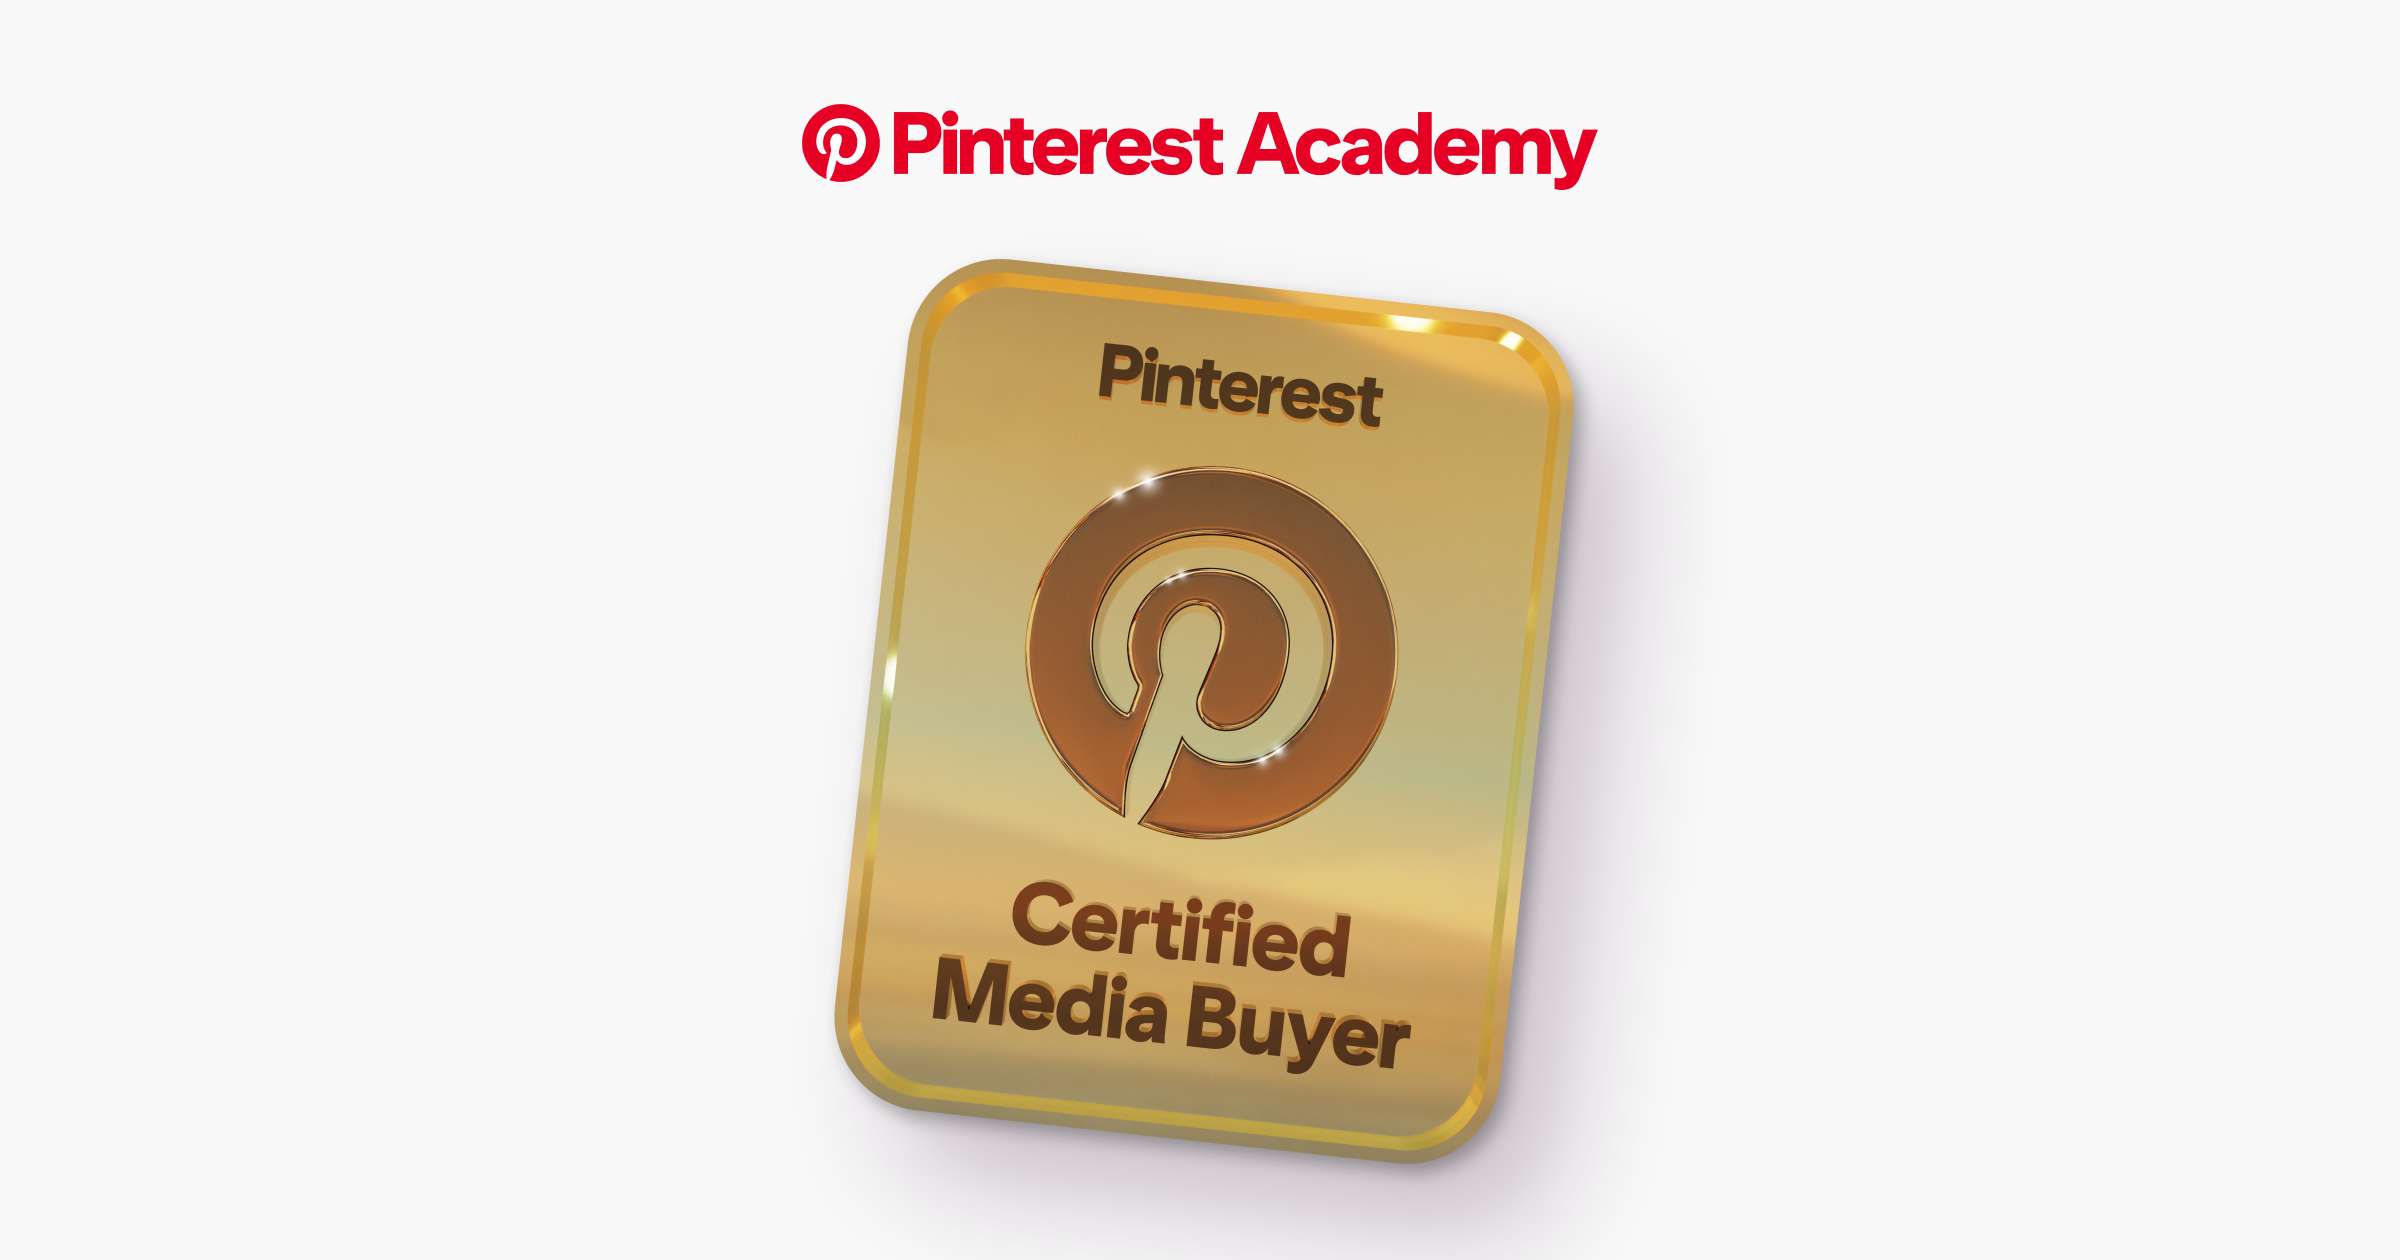 Introducing the Pinterest Media Buyer Certification (2 minute read)